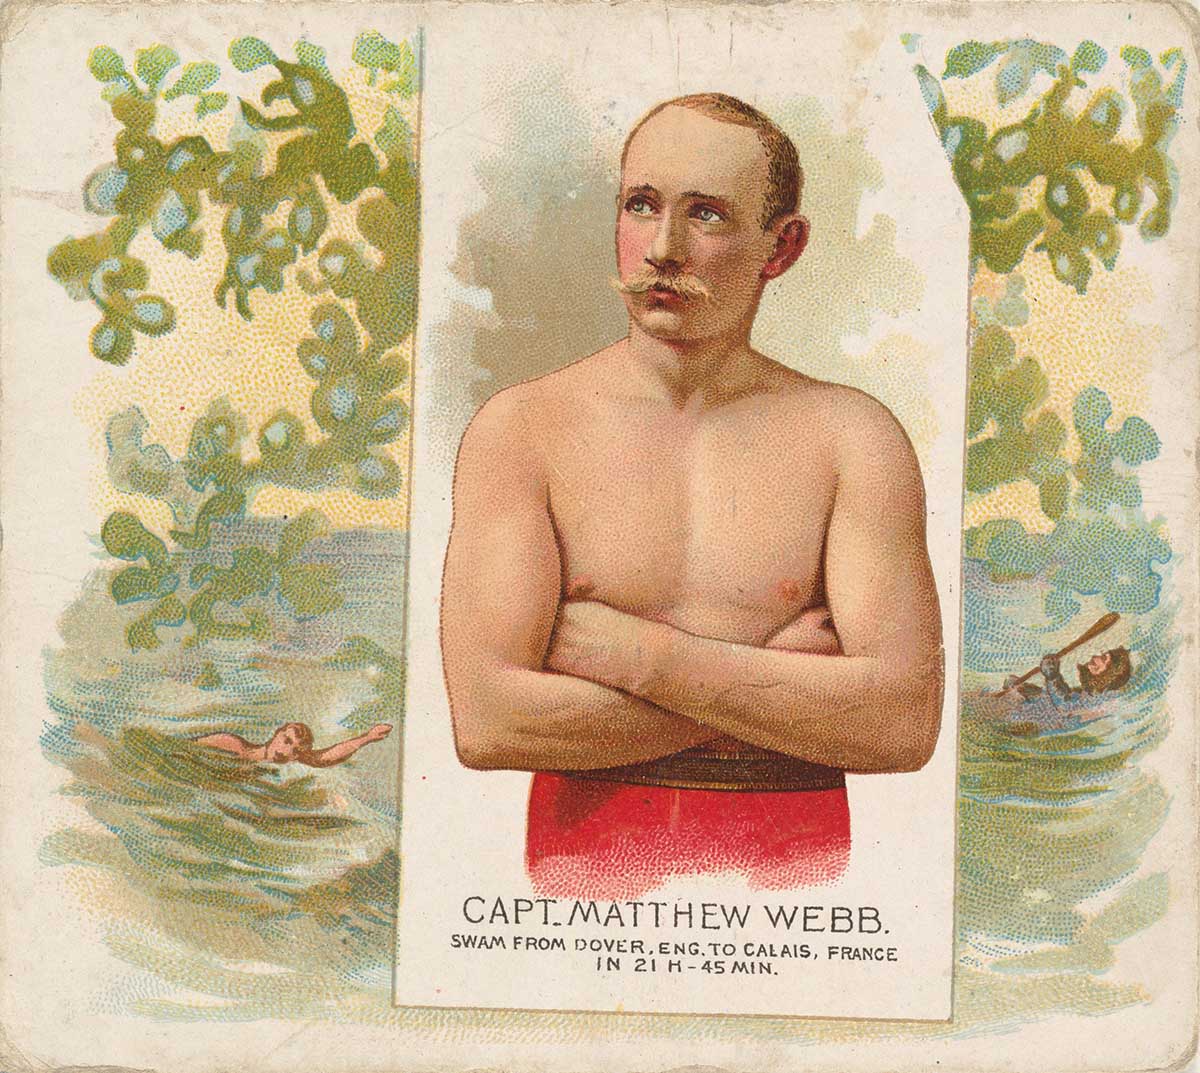 Captain Matthew Webb, Swam From Dover, England to Calais, France, from World's Champions, Second Series (N43) for Allen &amp; Ginter Cigarettes,1888. Metropolitan Museum of Art.